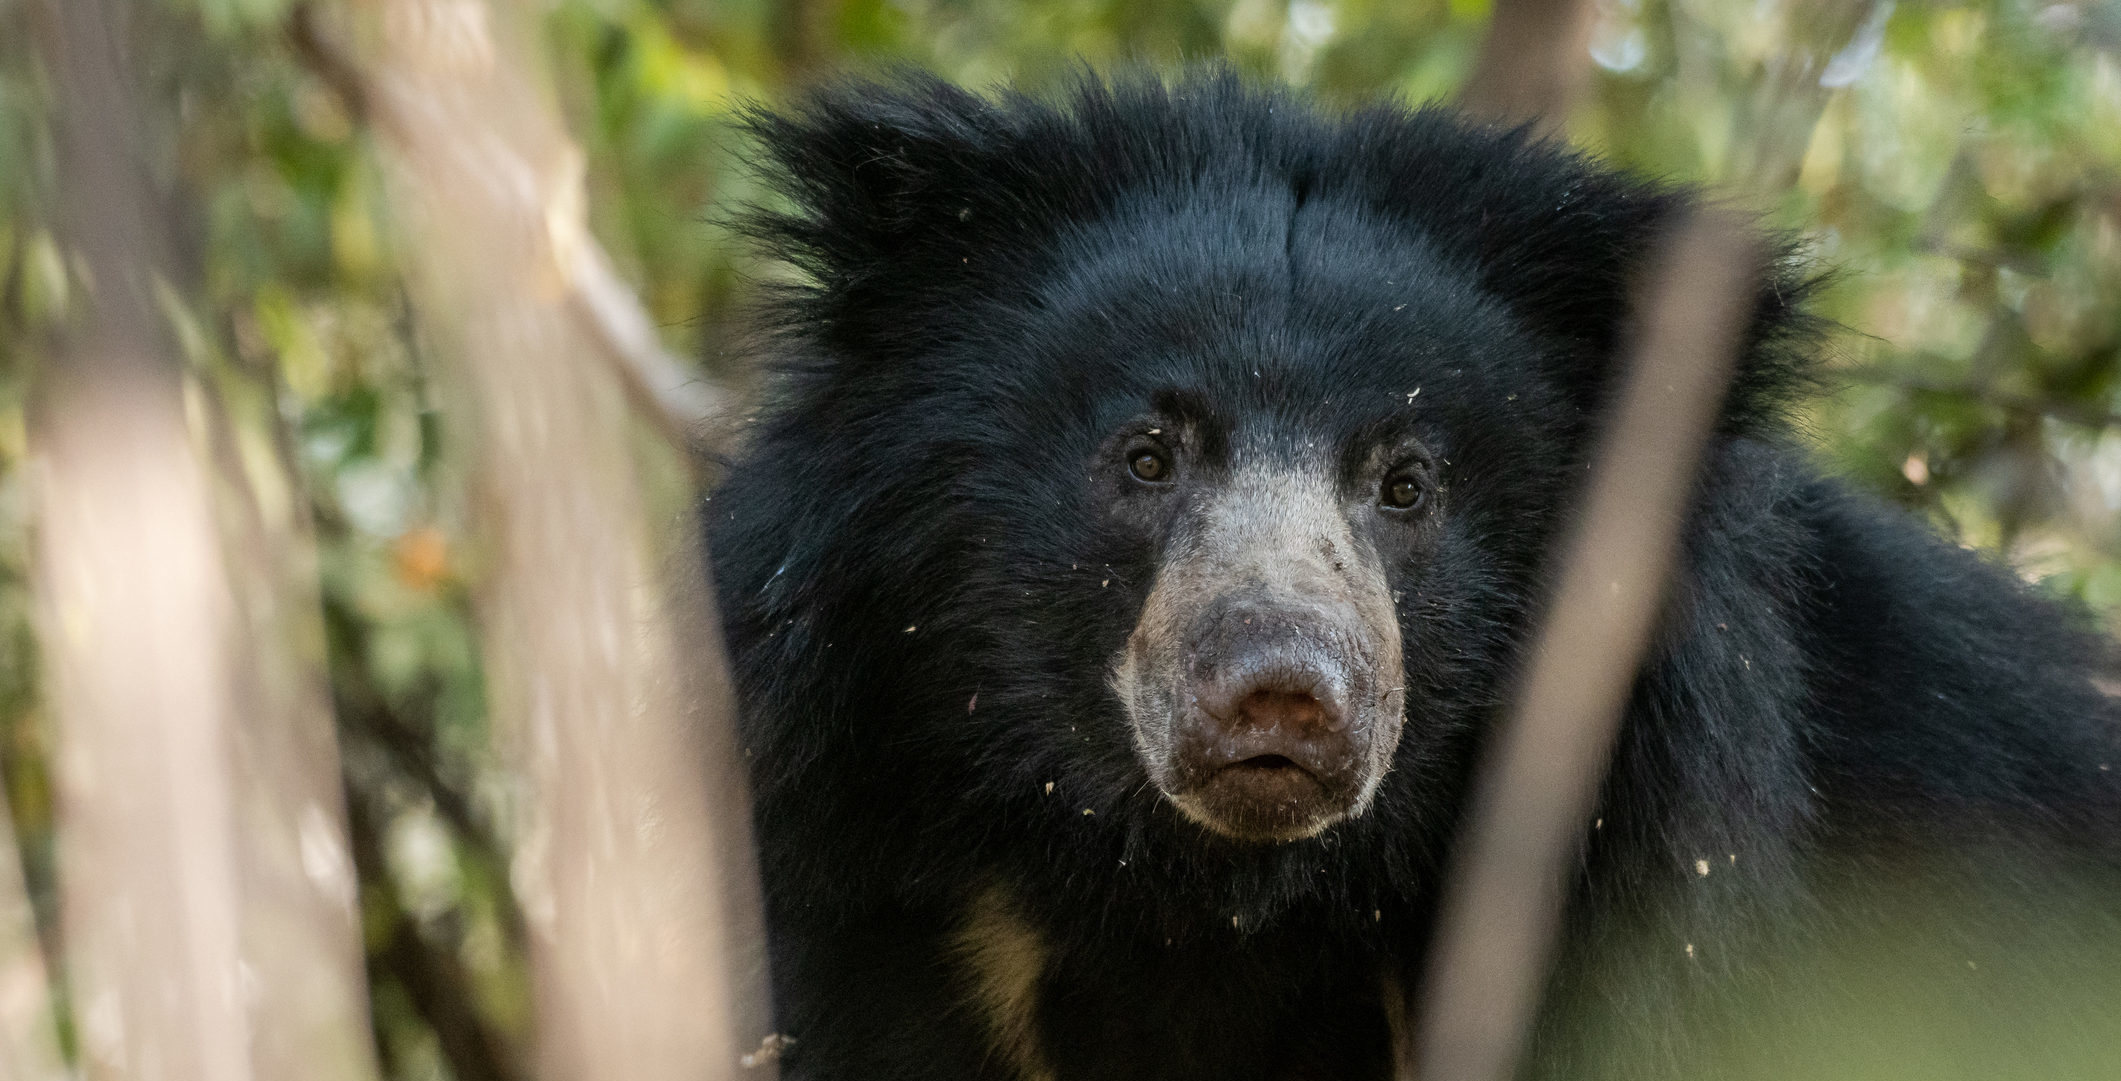 Witness extraordinary Indian wildlife like this wild sloth bear in Pench National Park when you take a tailor-made holiday with Alfred&.